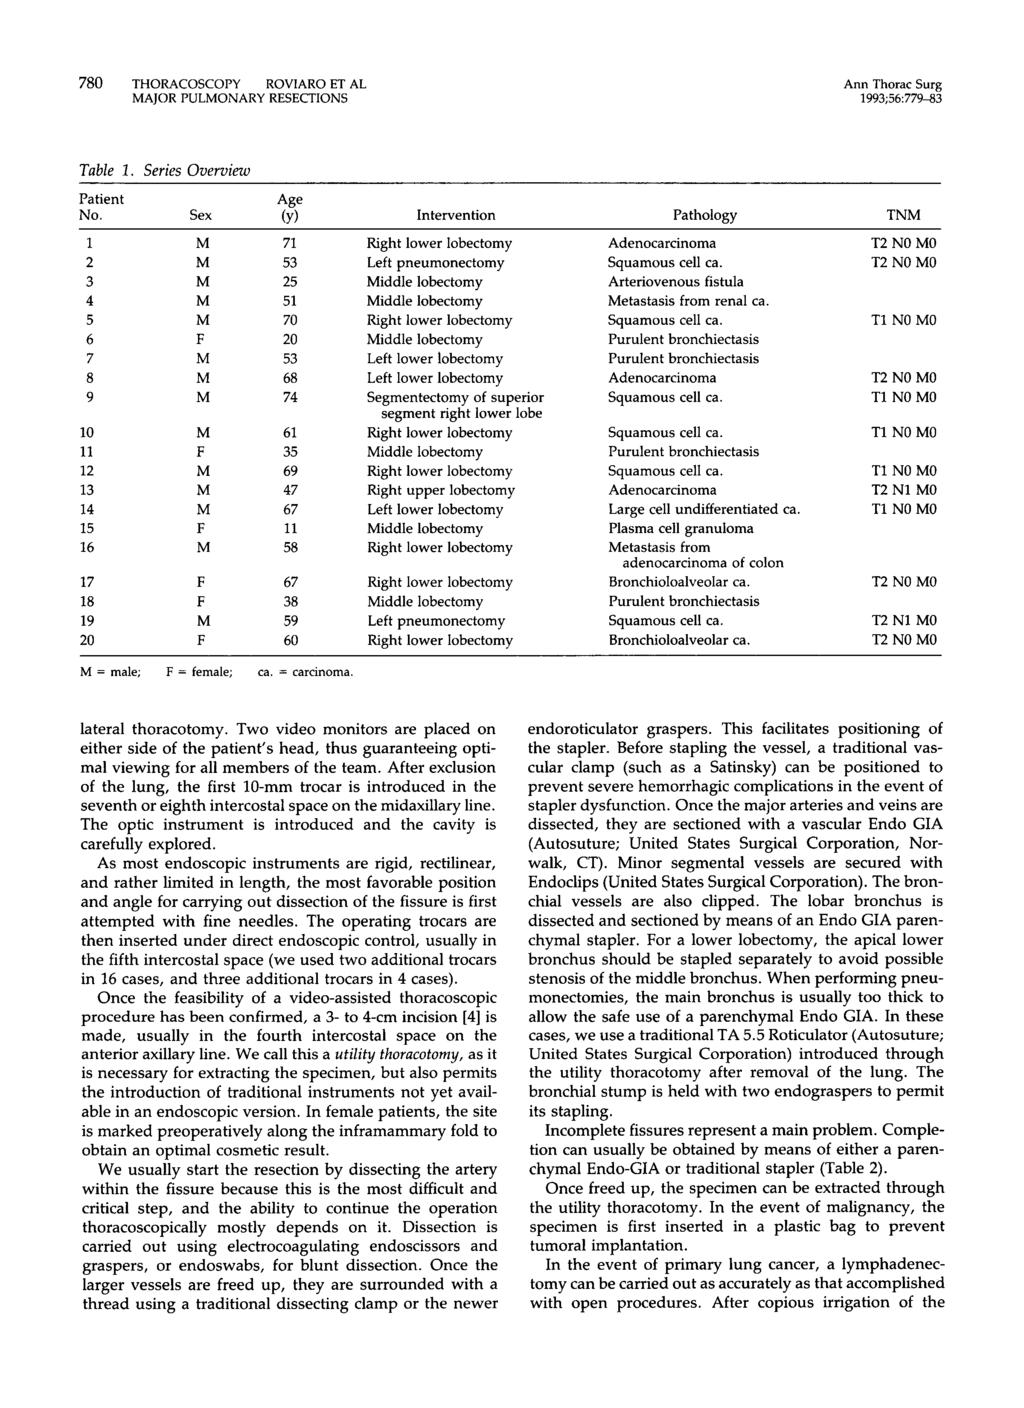 80 THORACOSCOPY ROVIARO ET AL Ann Thorac Surg 993;6:9-83 Table. Series Overview Patient Age. Sex (Y) Intervention Pathology TNM M Adenocarcinoma T NO MO M 3 Left pneumonectomy Squamous cell ca.